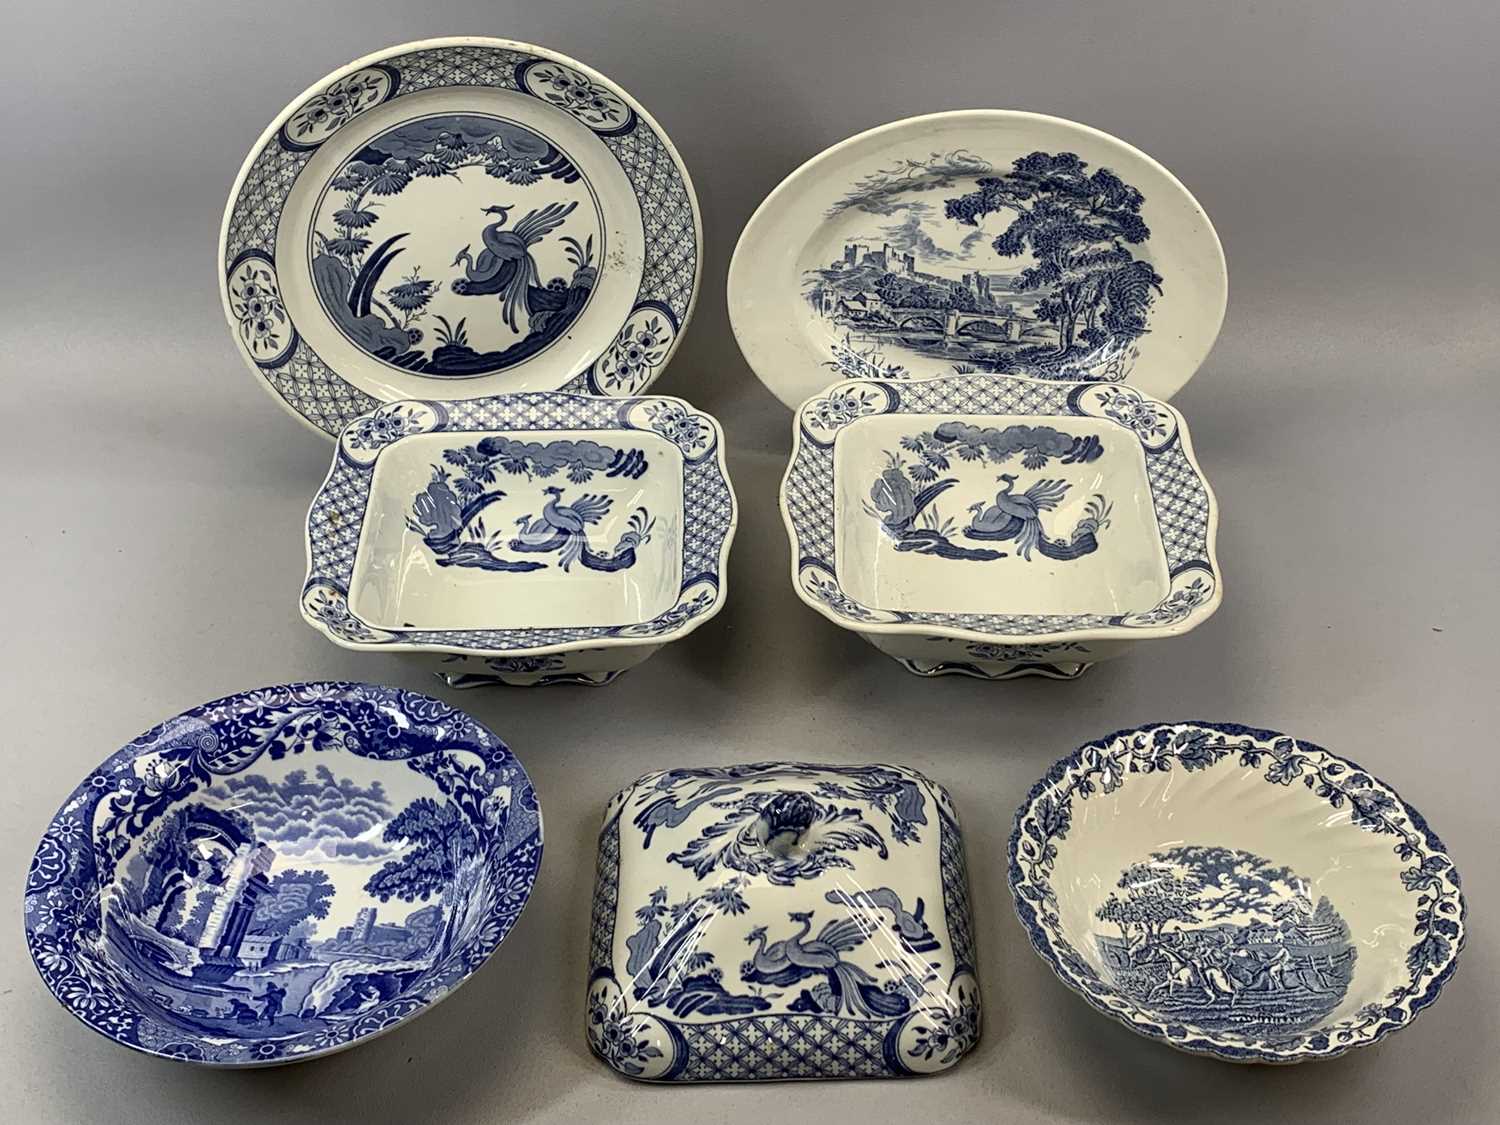 GROUP OF STAFFORDSHIRE POTTERY including Wedgwood blue Jasperware of jugs, plates, posy vases, - Image 3 of 5